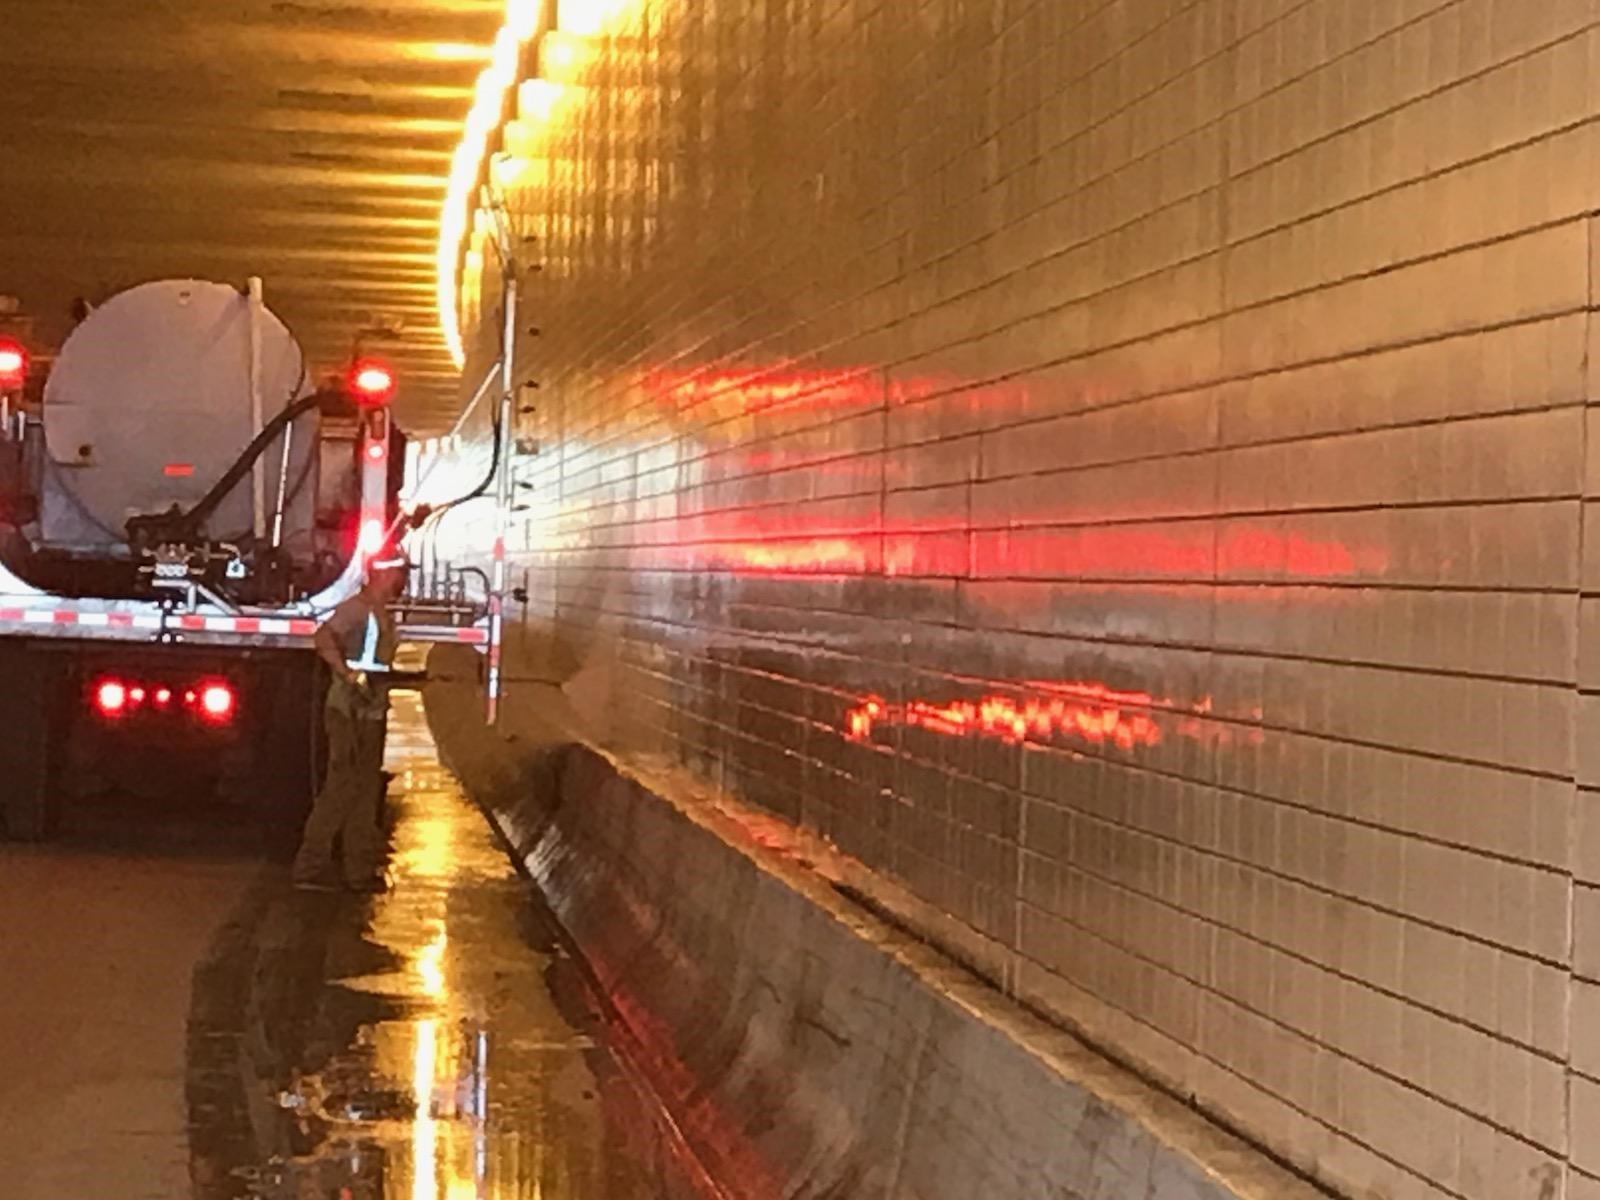 Photo: a truck in a tunnel spraying water at a tunnel wall